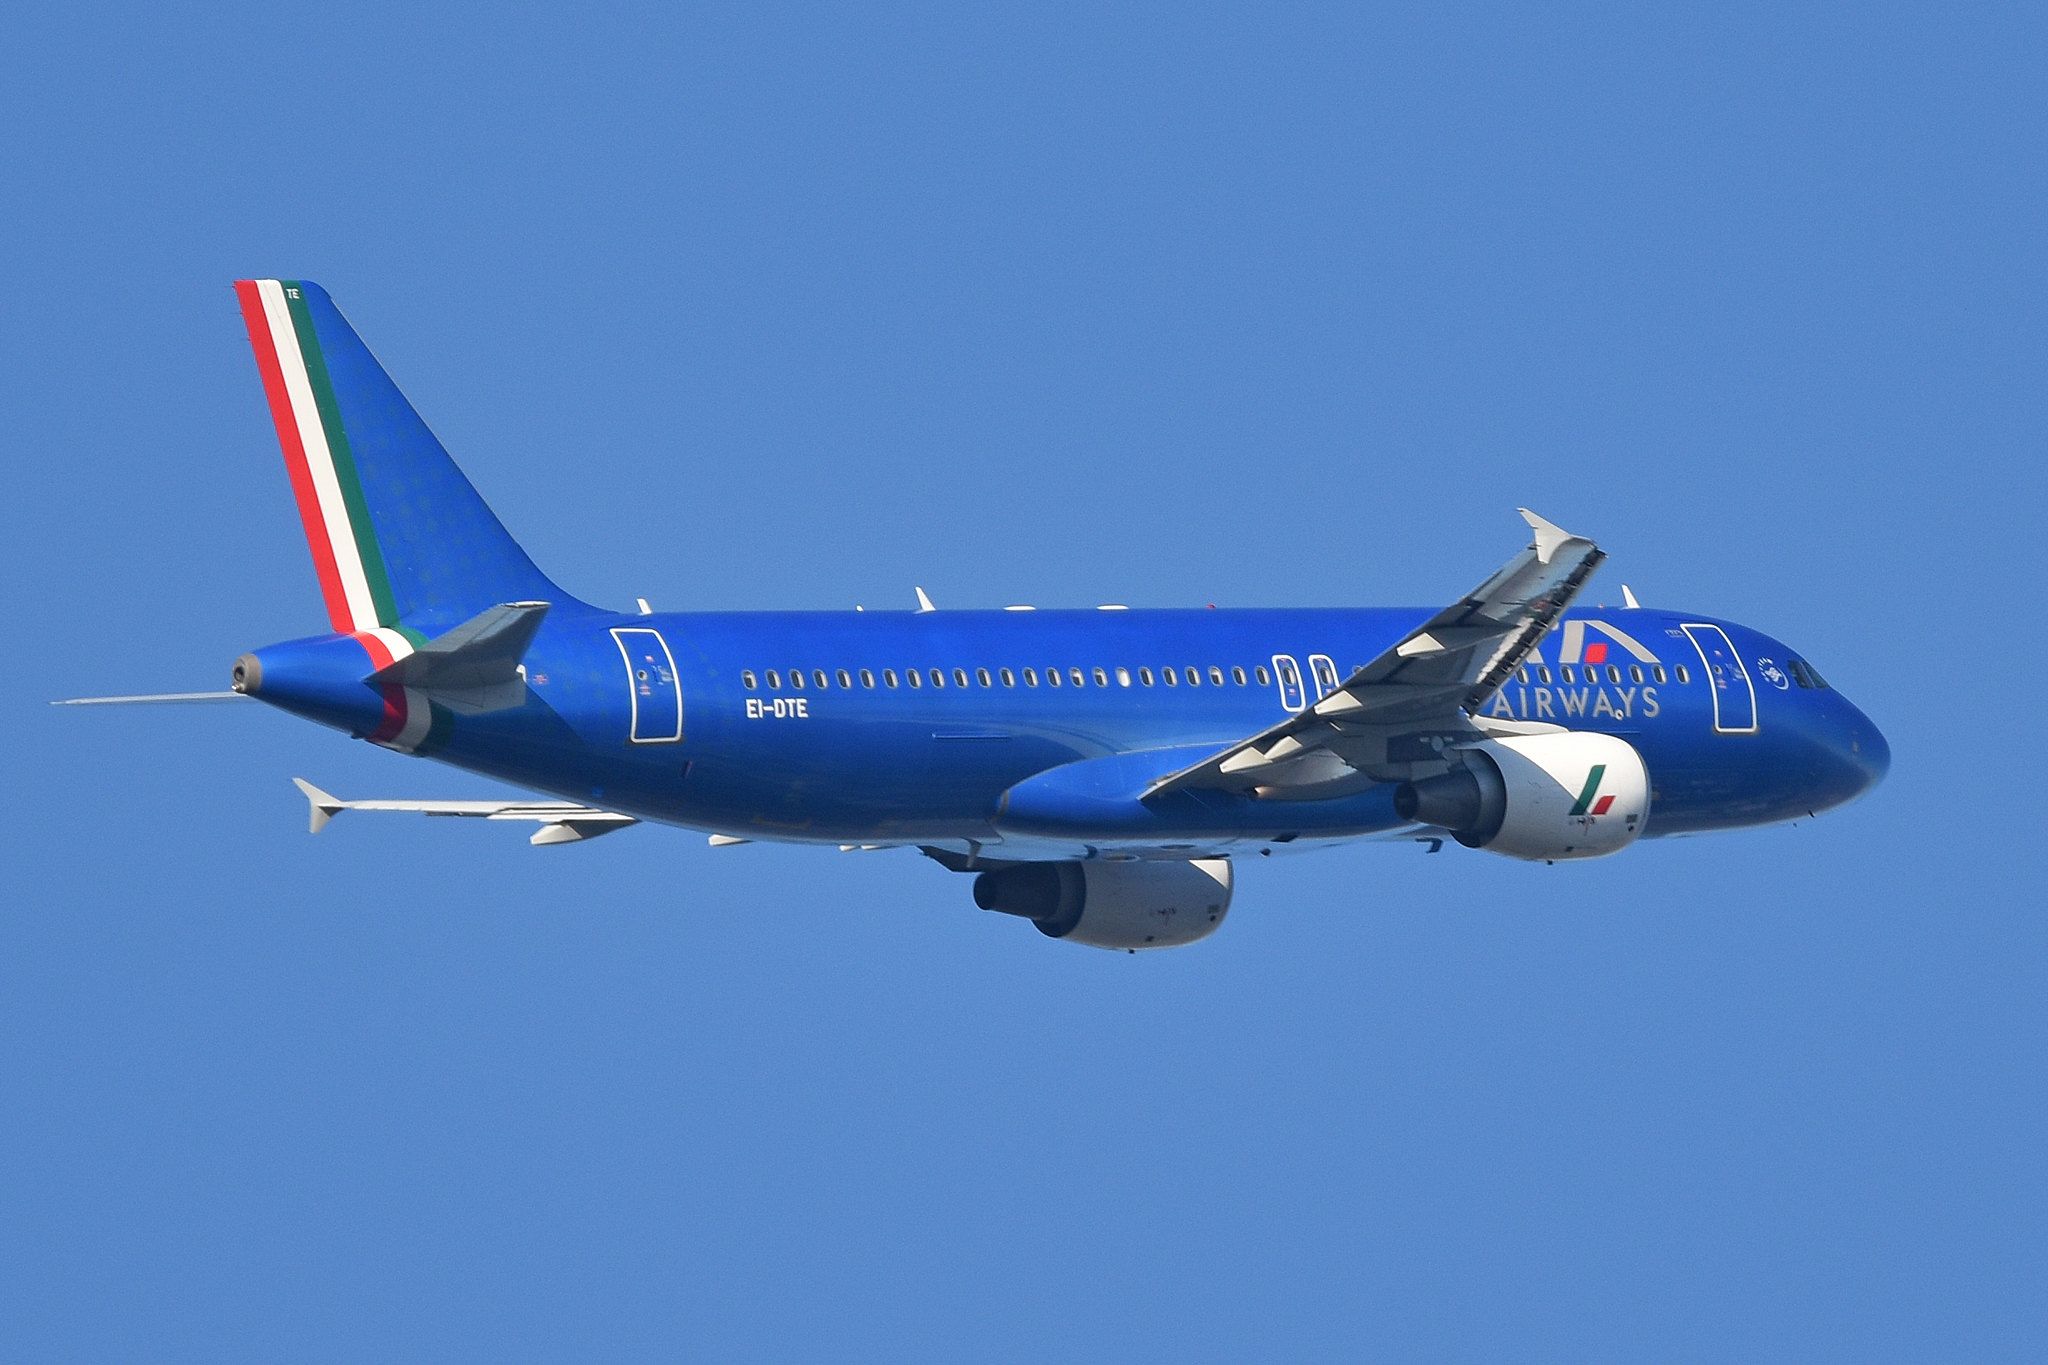 An ITA Airways Airbus A320-200 flying in the sky.